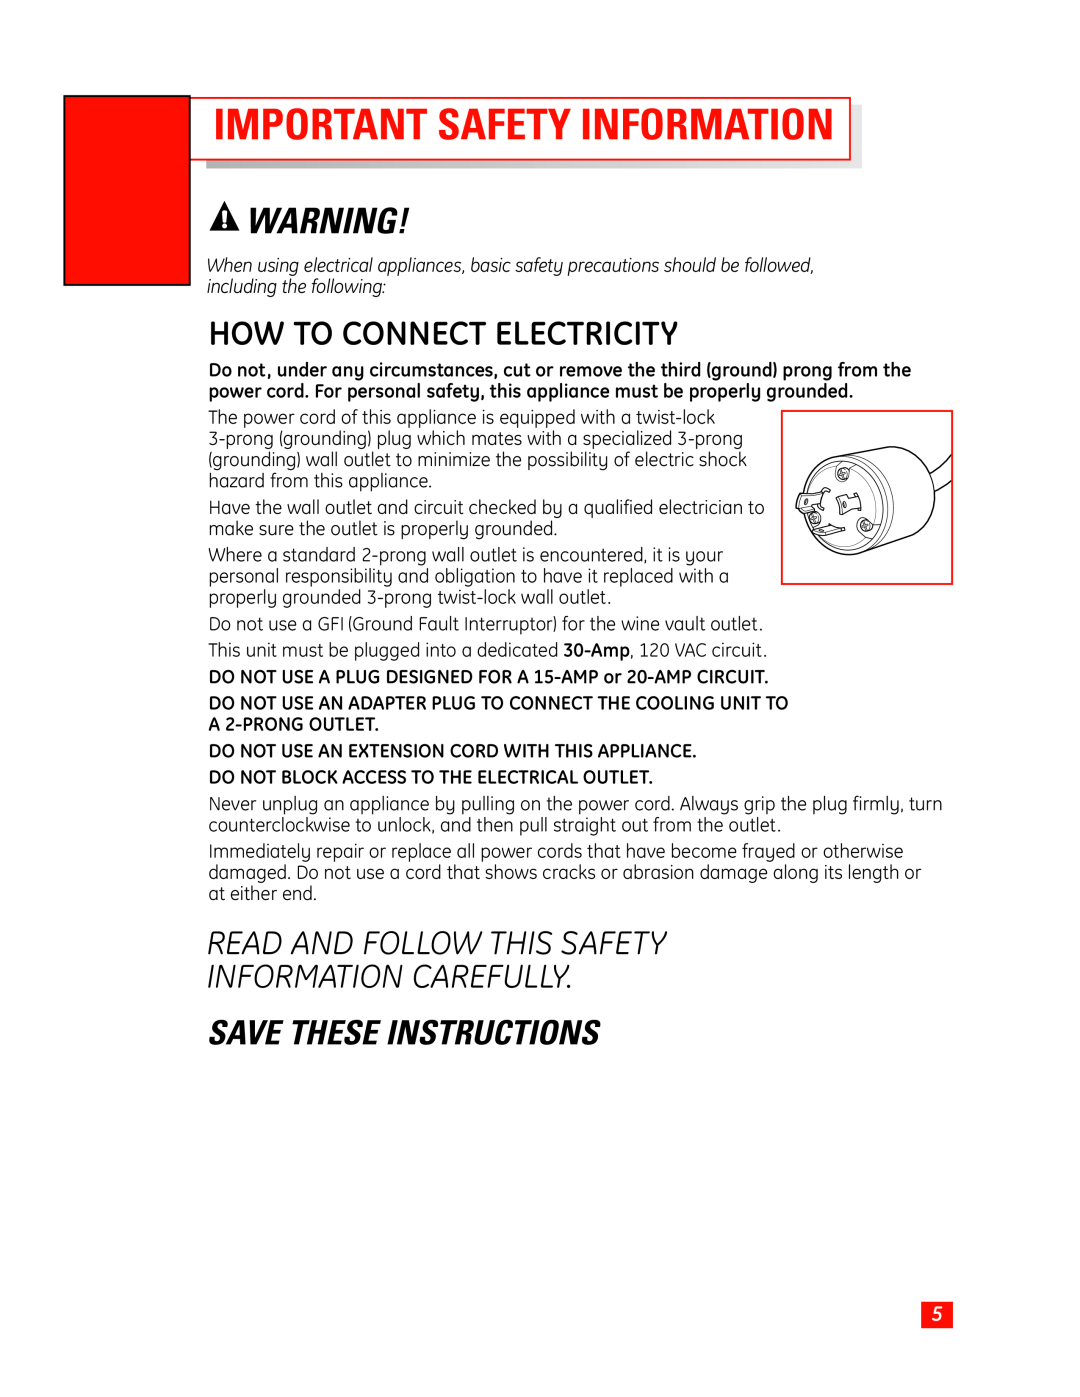 GE Monogram Wine Vault owner manual Important Safety Information, How To Connect Electricity, Save These Instructions 